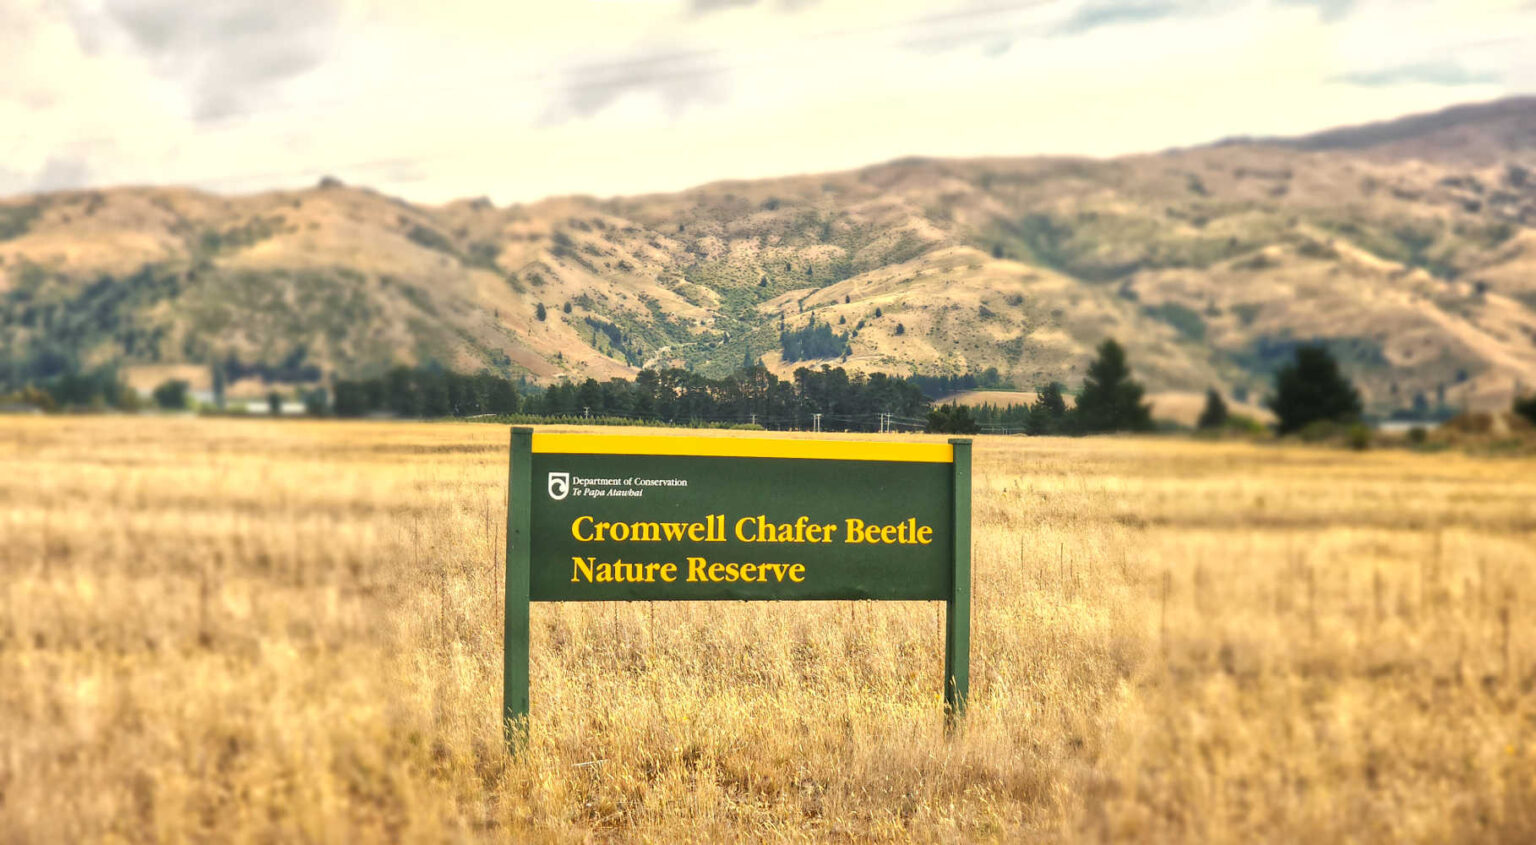 Cromwell Chafer Beetle Nature Reserve, a paddock where a noctural bettle lurks, South Island, Wanaka, New Zealand